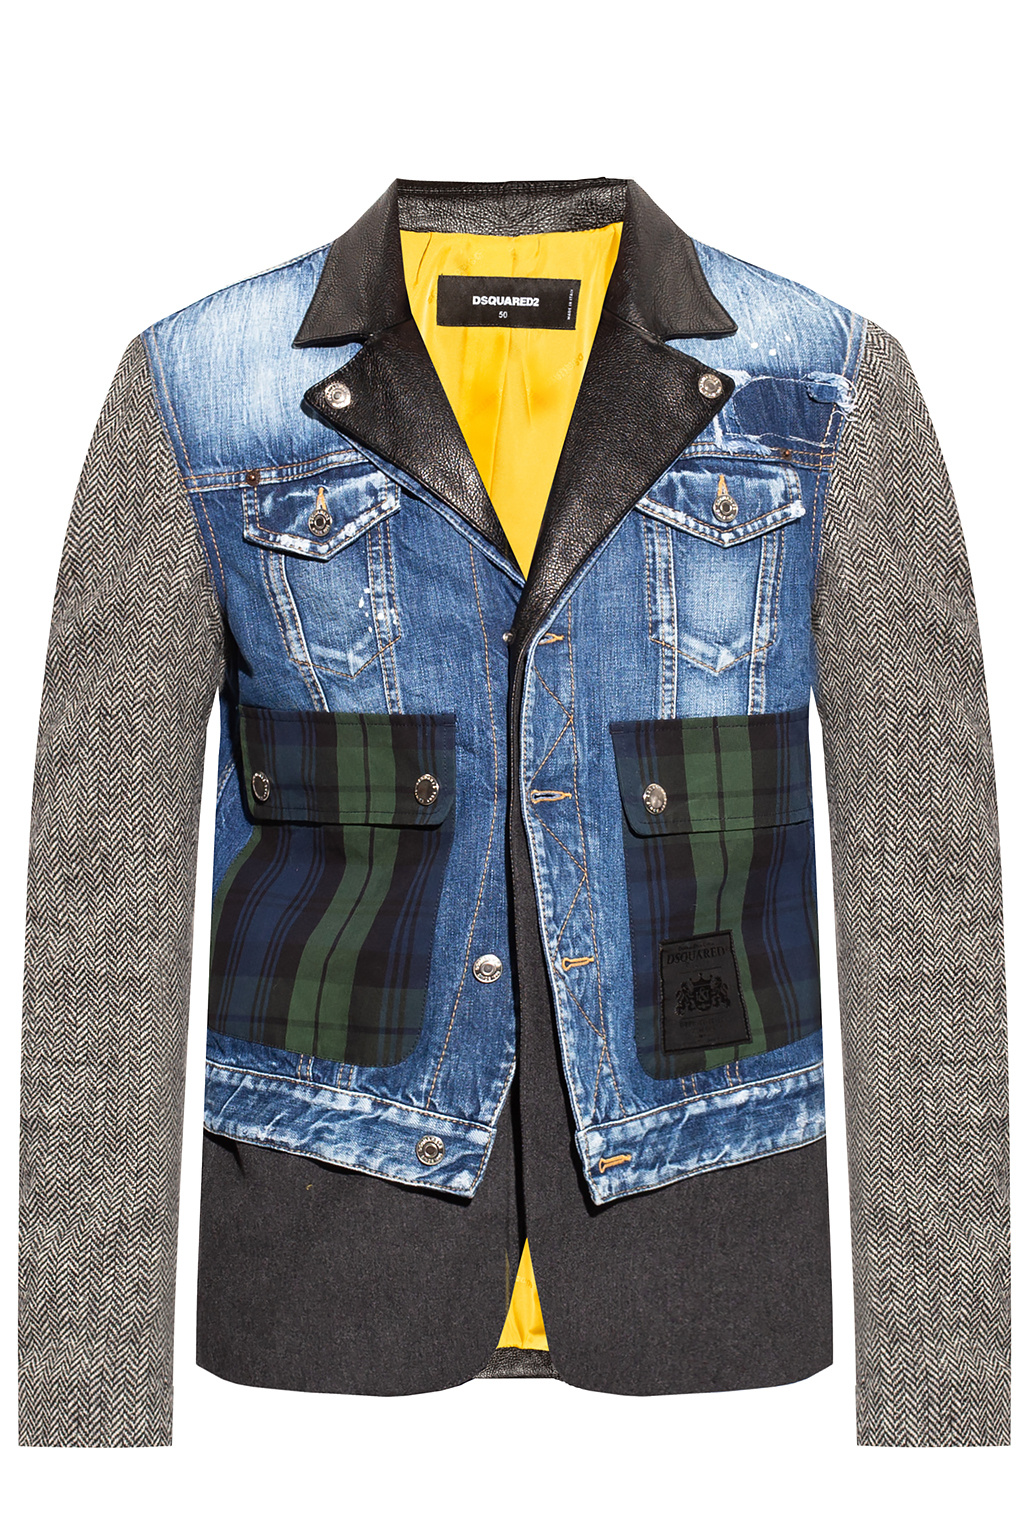 Dsquared2 Jacket in contrasting fabrics